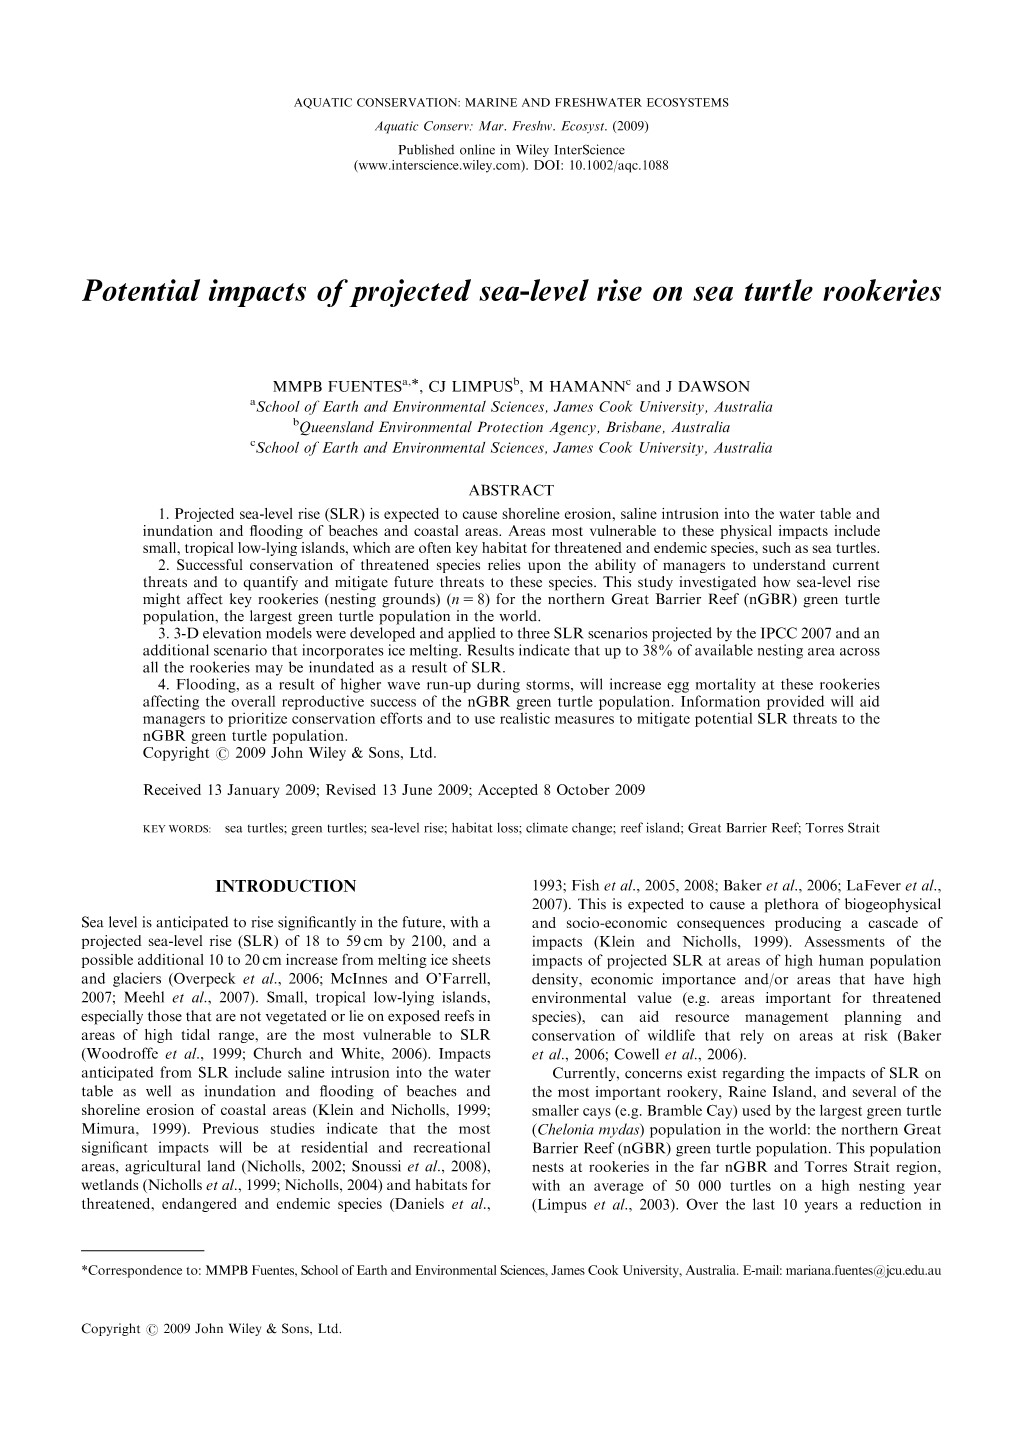 Potential Impacts of Projected Sea-Level Rise on Sea Turtle Rookeries